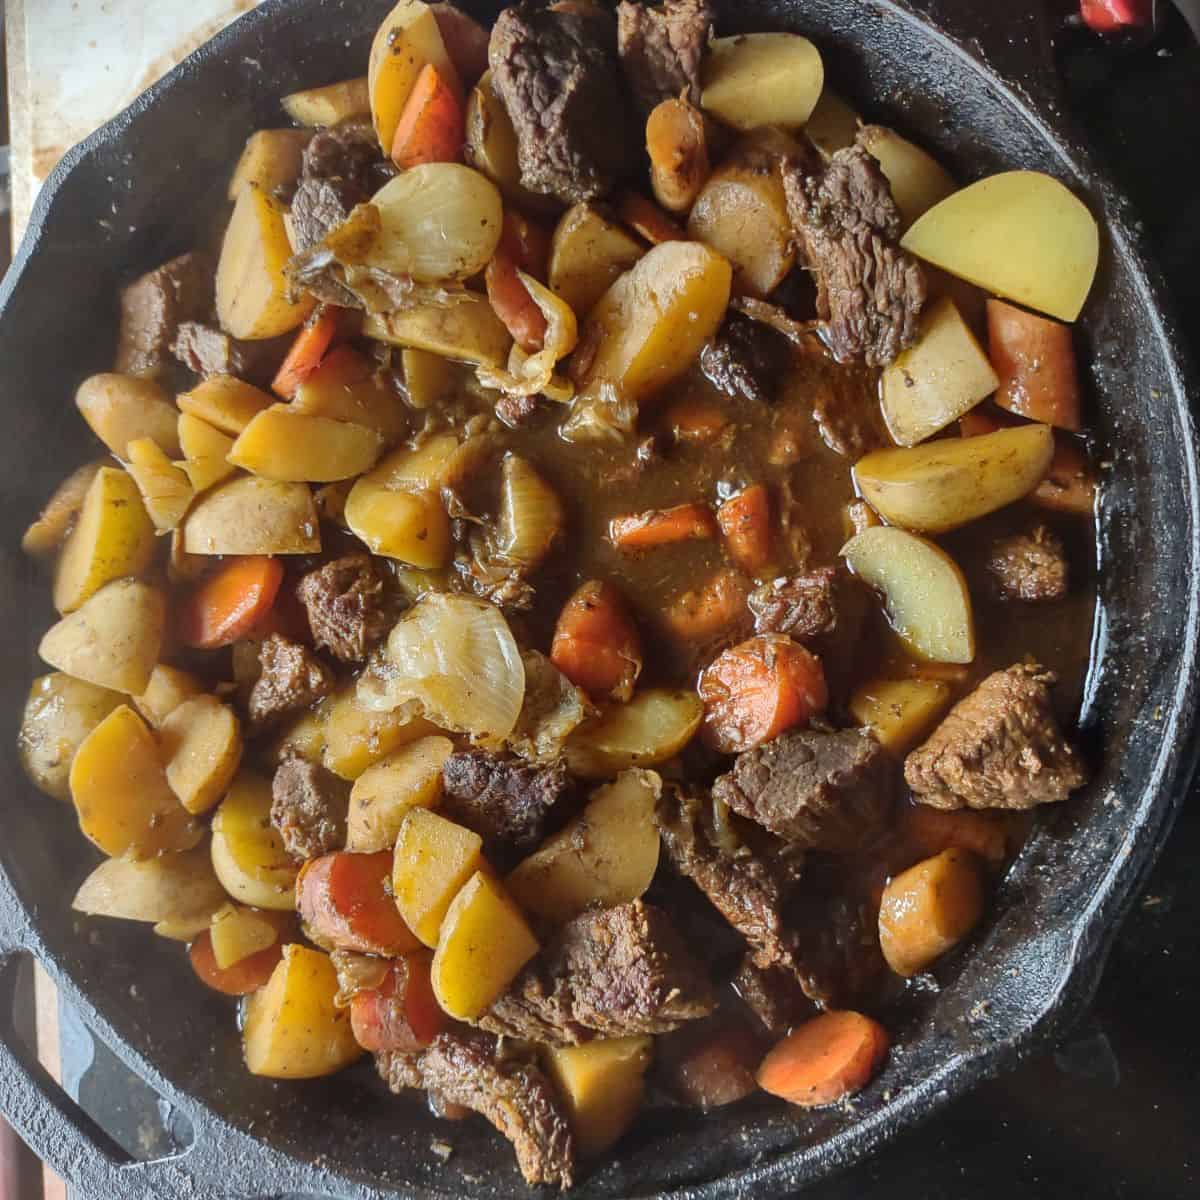 A cast iron skillet filled with beef stew eat, potatoes, parsnips, and carrots. You can see liquid in the bottom of the skillet.